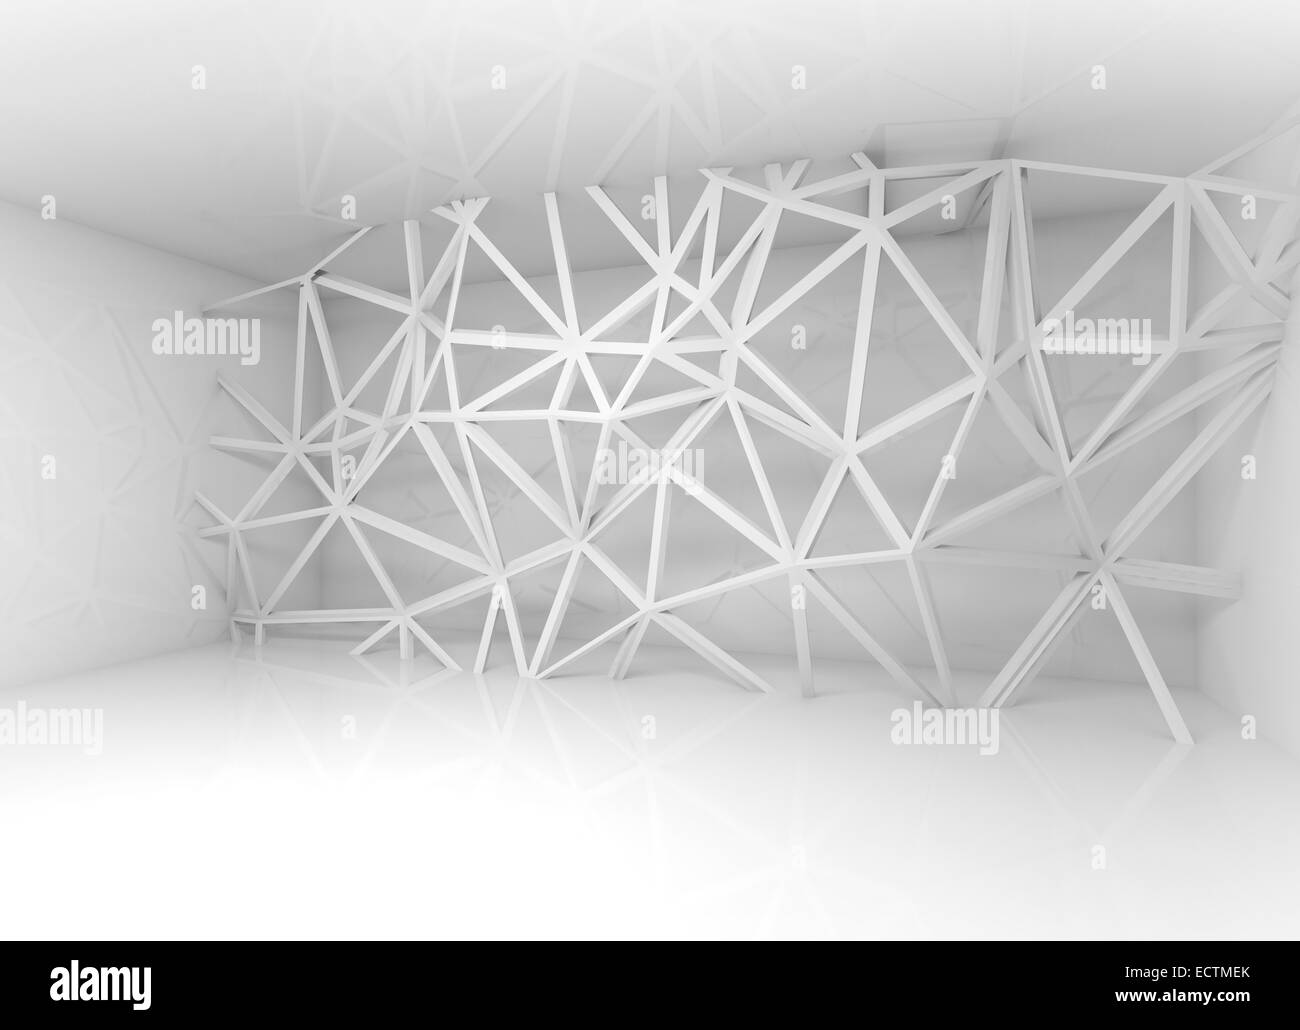 Abstract white room interior with chaotic 3d wire frame construction over the wall Stock Photo